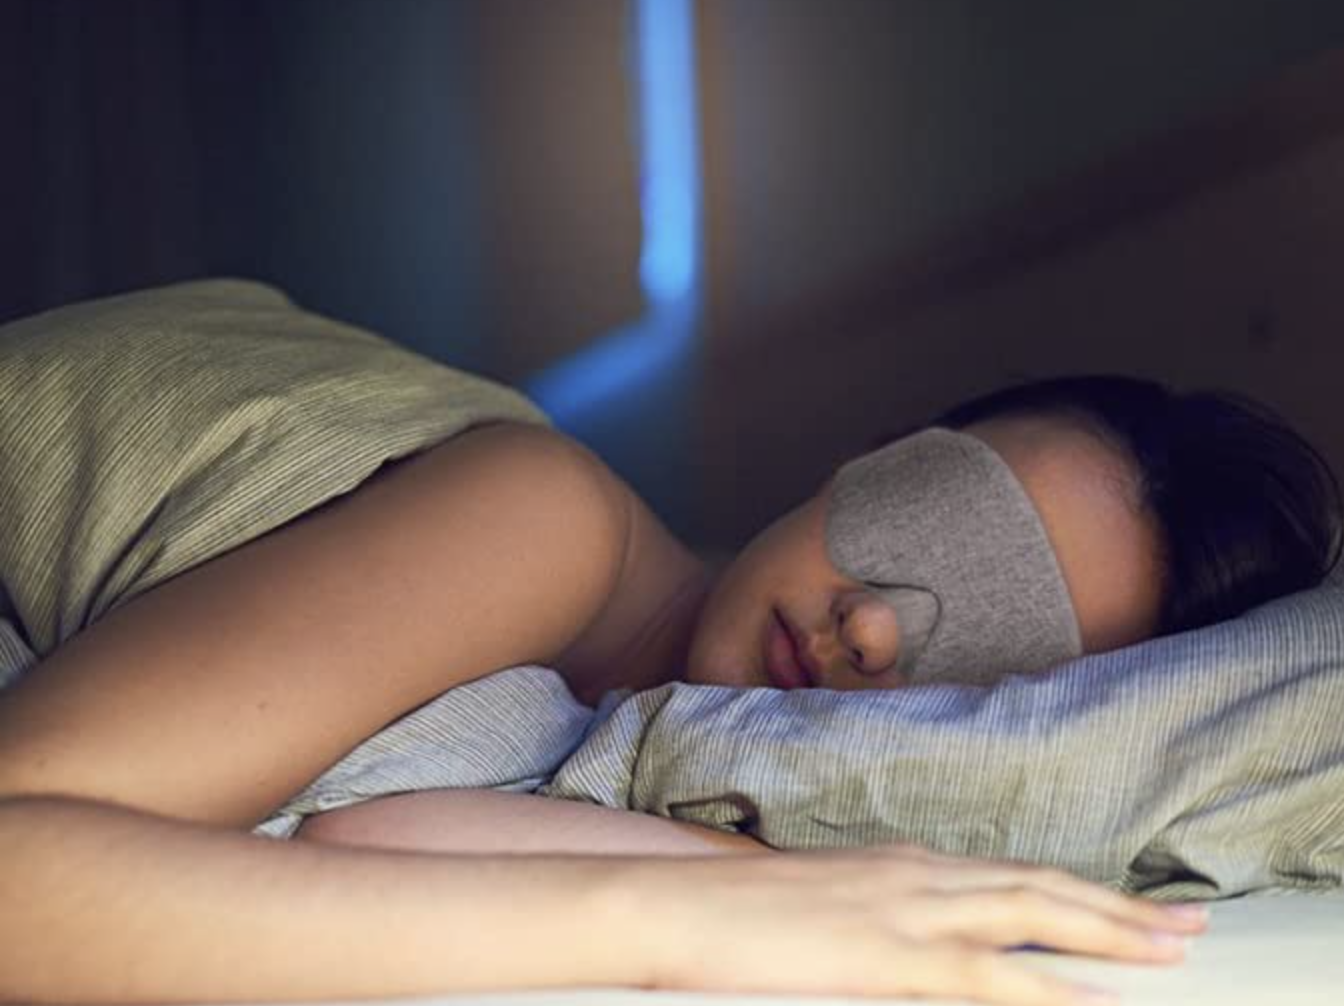 A person wearing the mask while they are sleeping in bed